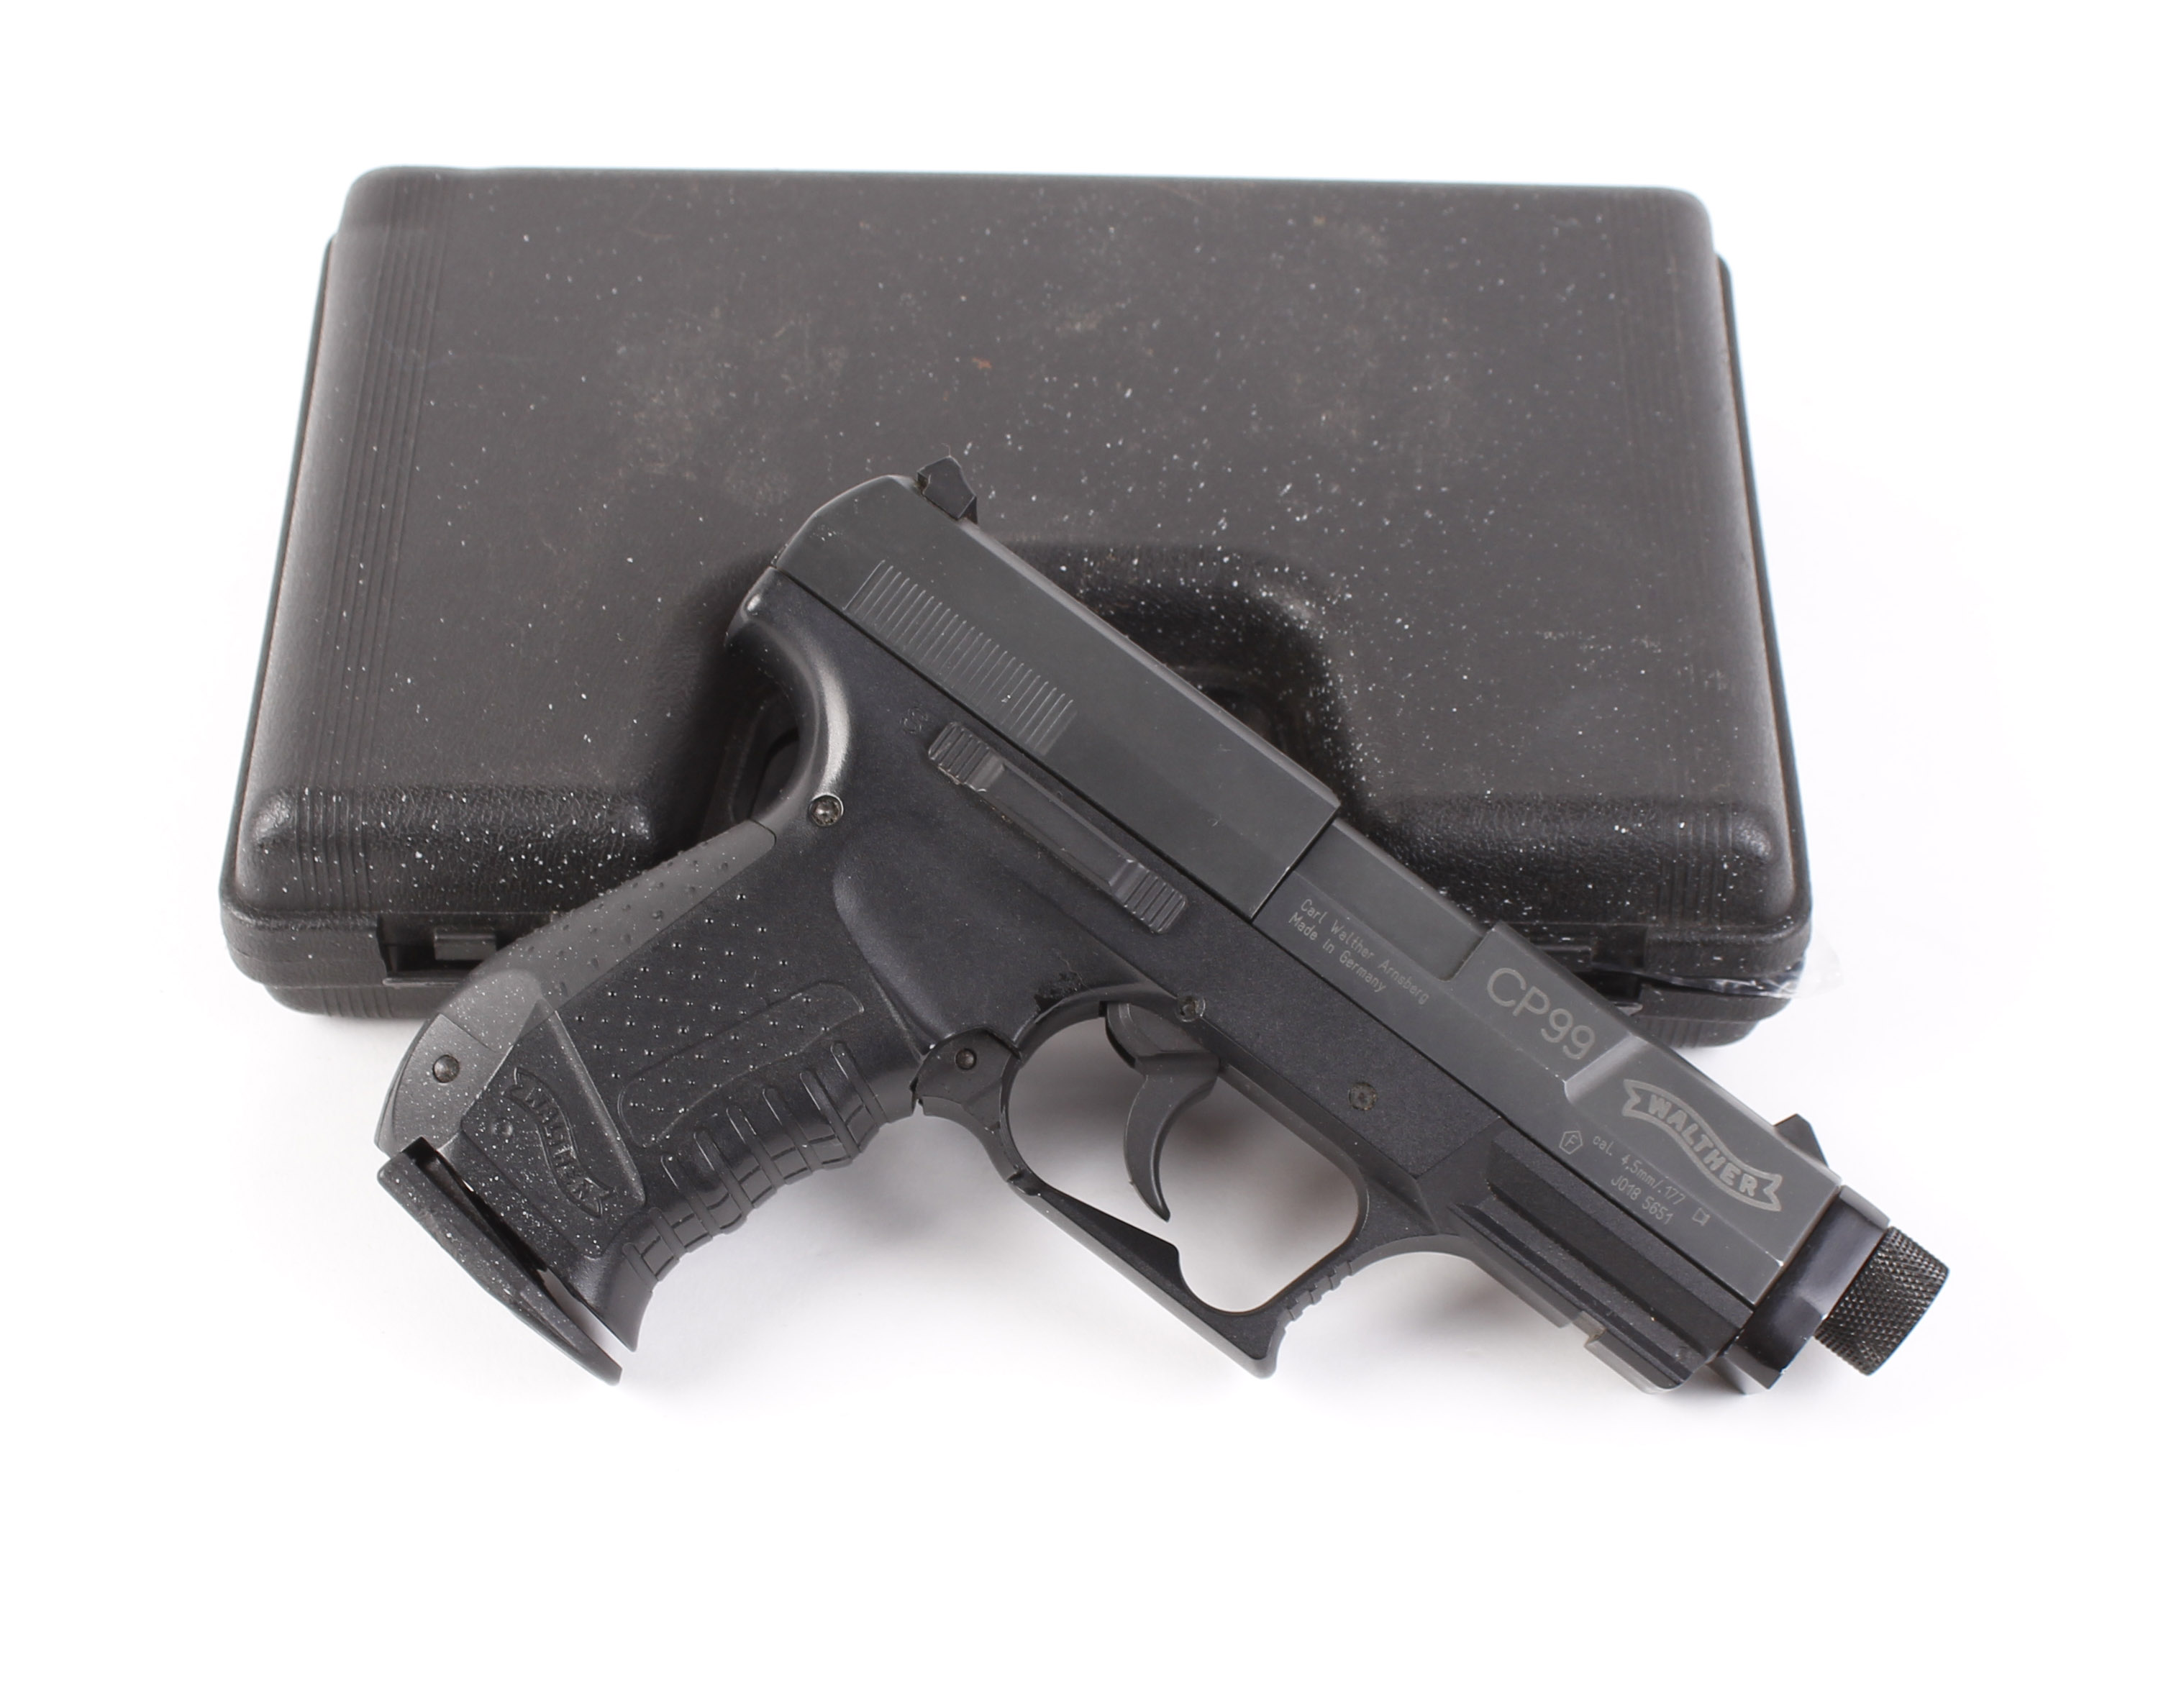 4.5mm Walther CP99 Co2 semi automatic air pistol, two magazines, with clip on laser sight, in hard